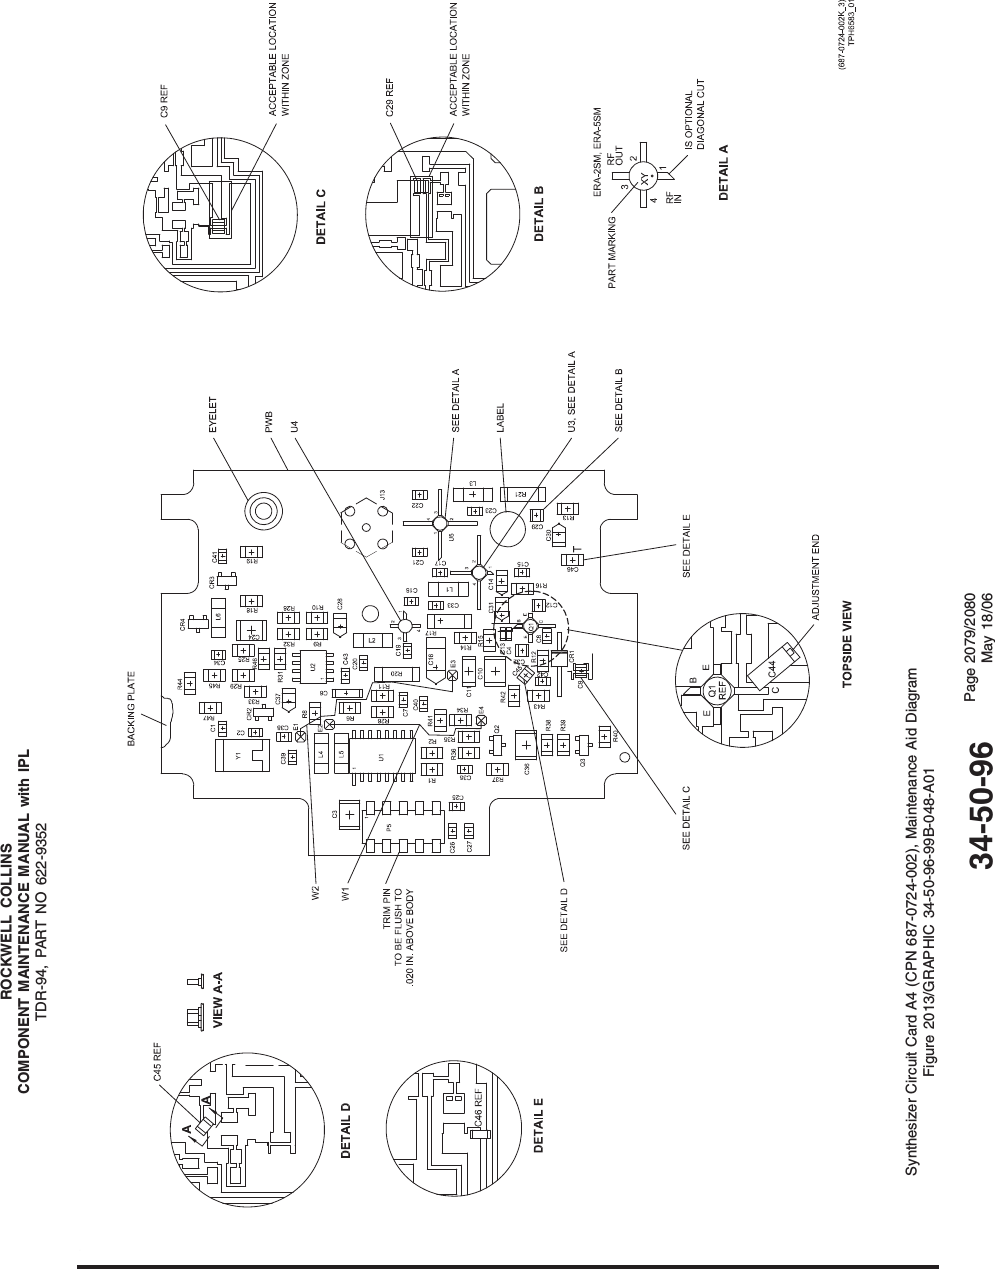 ROCKWELL COLLINSCOMPONENT MAINTENANCE MANUAL with IPLTDR-94, PART NO 622-9352Synthesizer Circuit Card A4 (CPN 687-0724-002), Maintenance Aid DiagramFigure 2013/GRAPHIC 34-50-96-99B-048-A0134-50-96 Page 2079/2080May 18/06